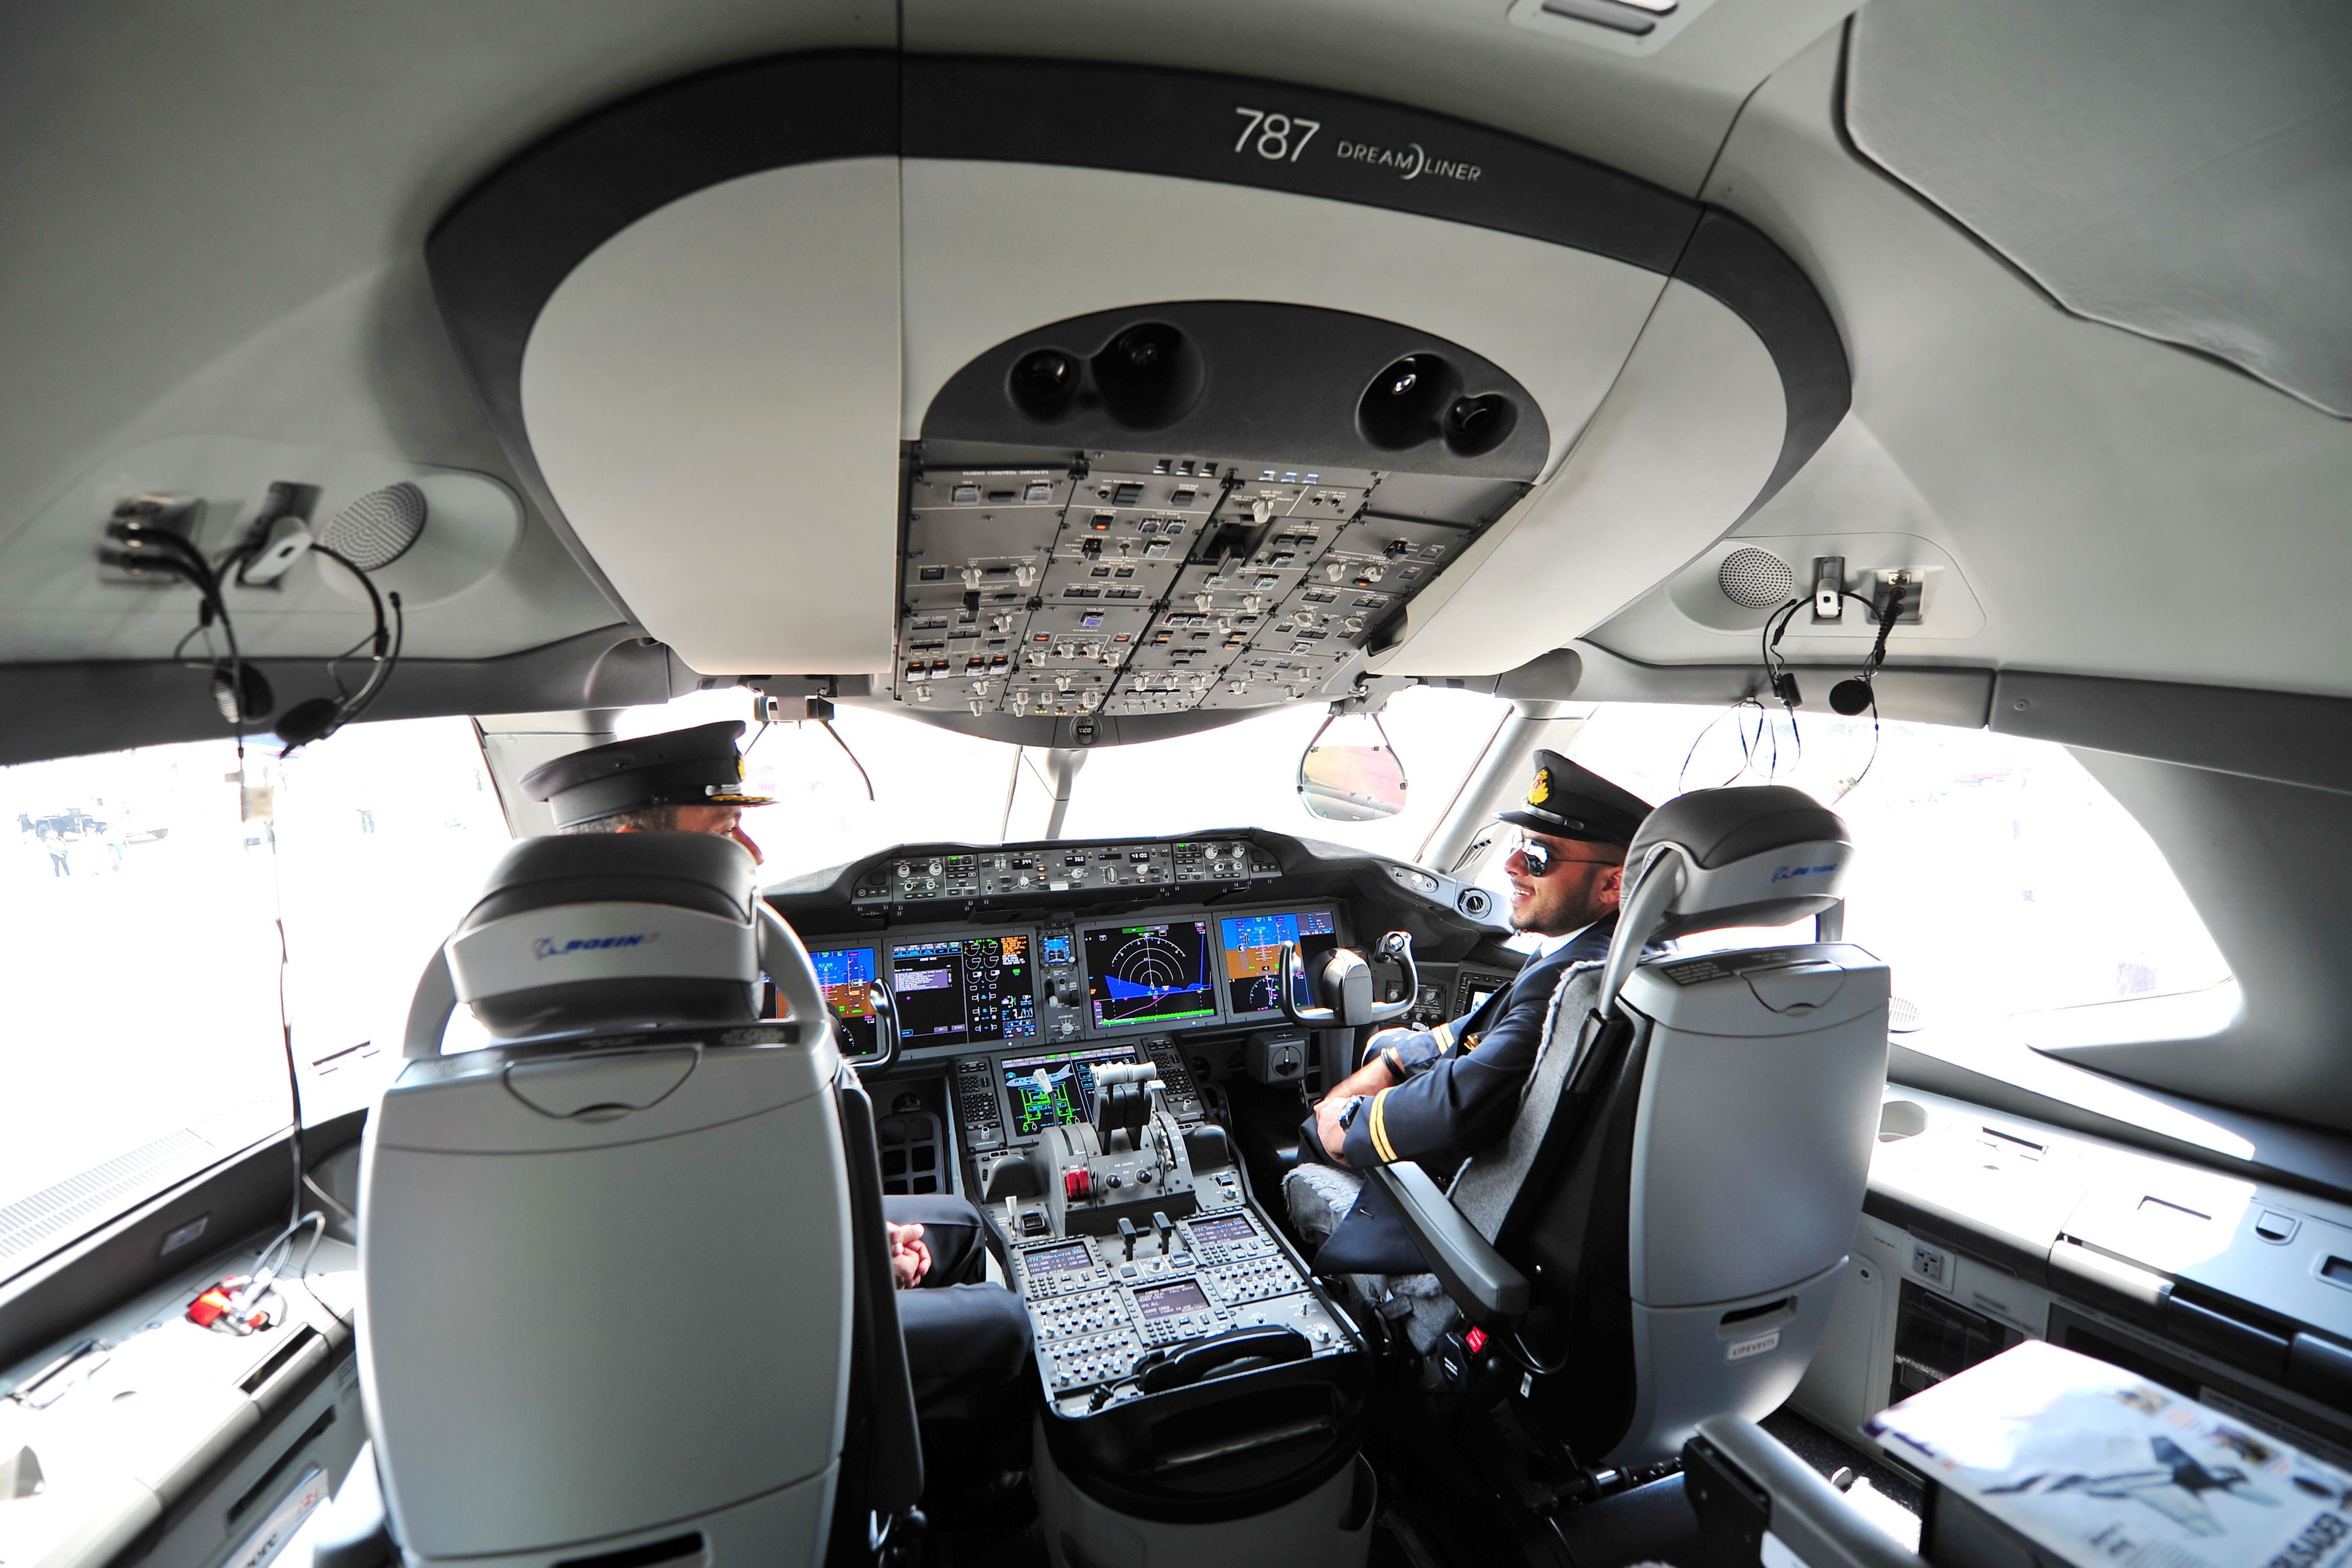 Two pilots sitting in the cockpit of a Boeing 787.